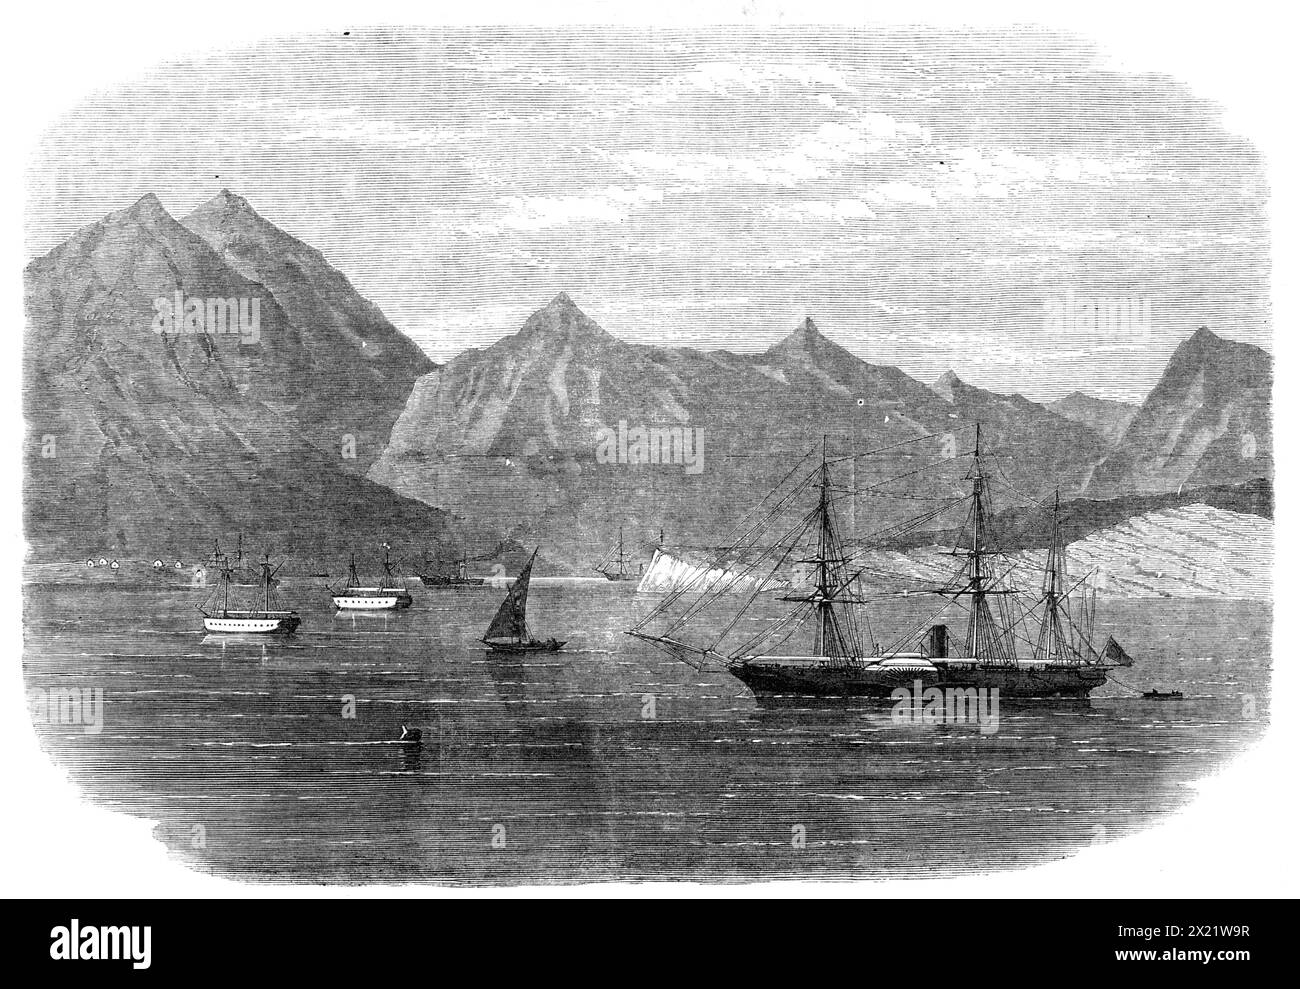 The Indo-European Telegraph: Mussendom Station, Elphinstone Inlet, Persian Gulf, 1865. From a sketch by Lieut. Hewett, of the gun-boat Clyde. 'The chief importance of the work was centred in the manufacture and laying of the enormous mass of cable, nearly 1500 miles in length, and weighing upwards of 5000 tons, which was constructed under the careful supervision of the engineers, at the works of the Gutta-Percha Company...the laying of the cable...commenced at Gwadur...under the superintendence of Sir Charles Bright...The first section from Gwadur to Mussendom, a barren promontory at the entra Stock Photo